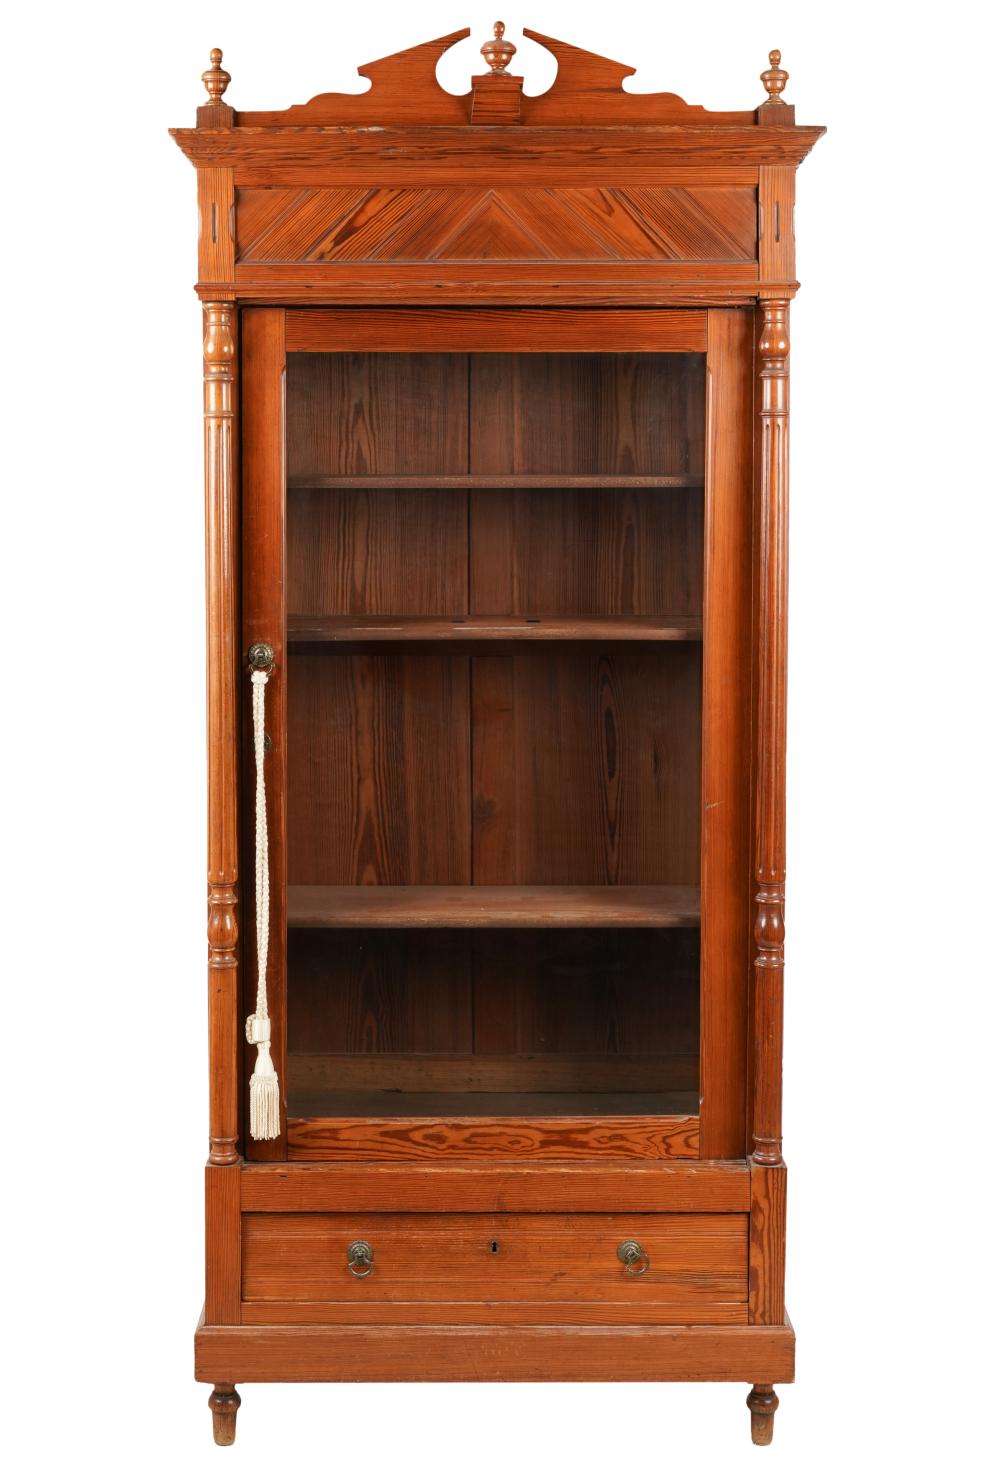 STAINED WOOD BOOKCASE CABINETStained